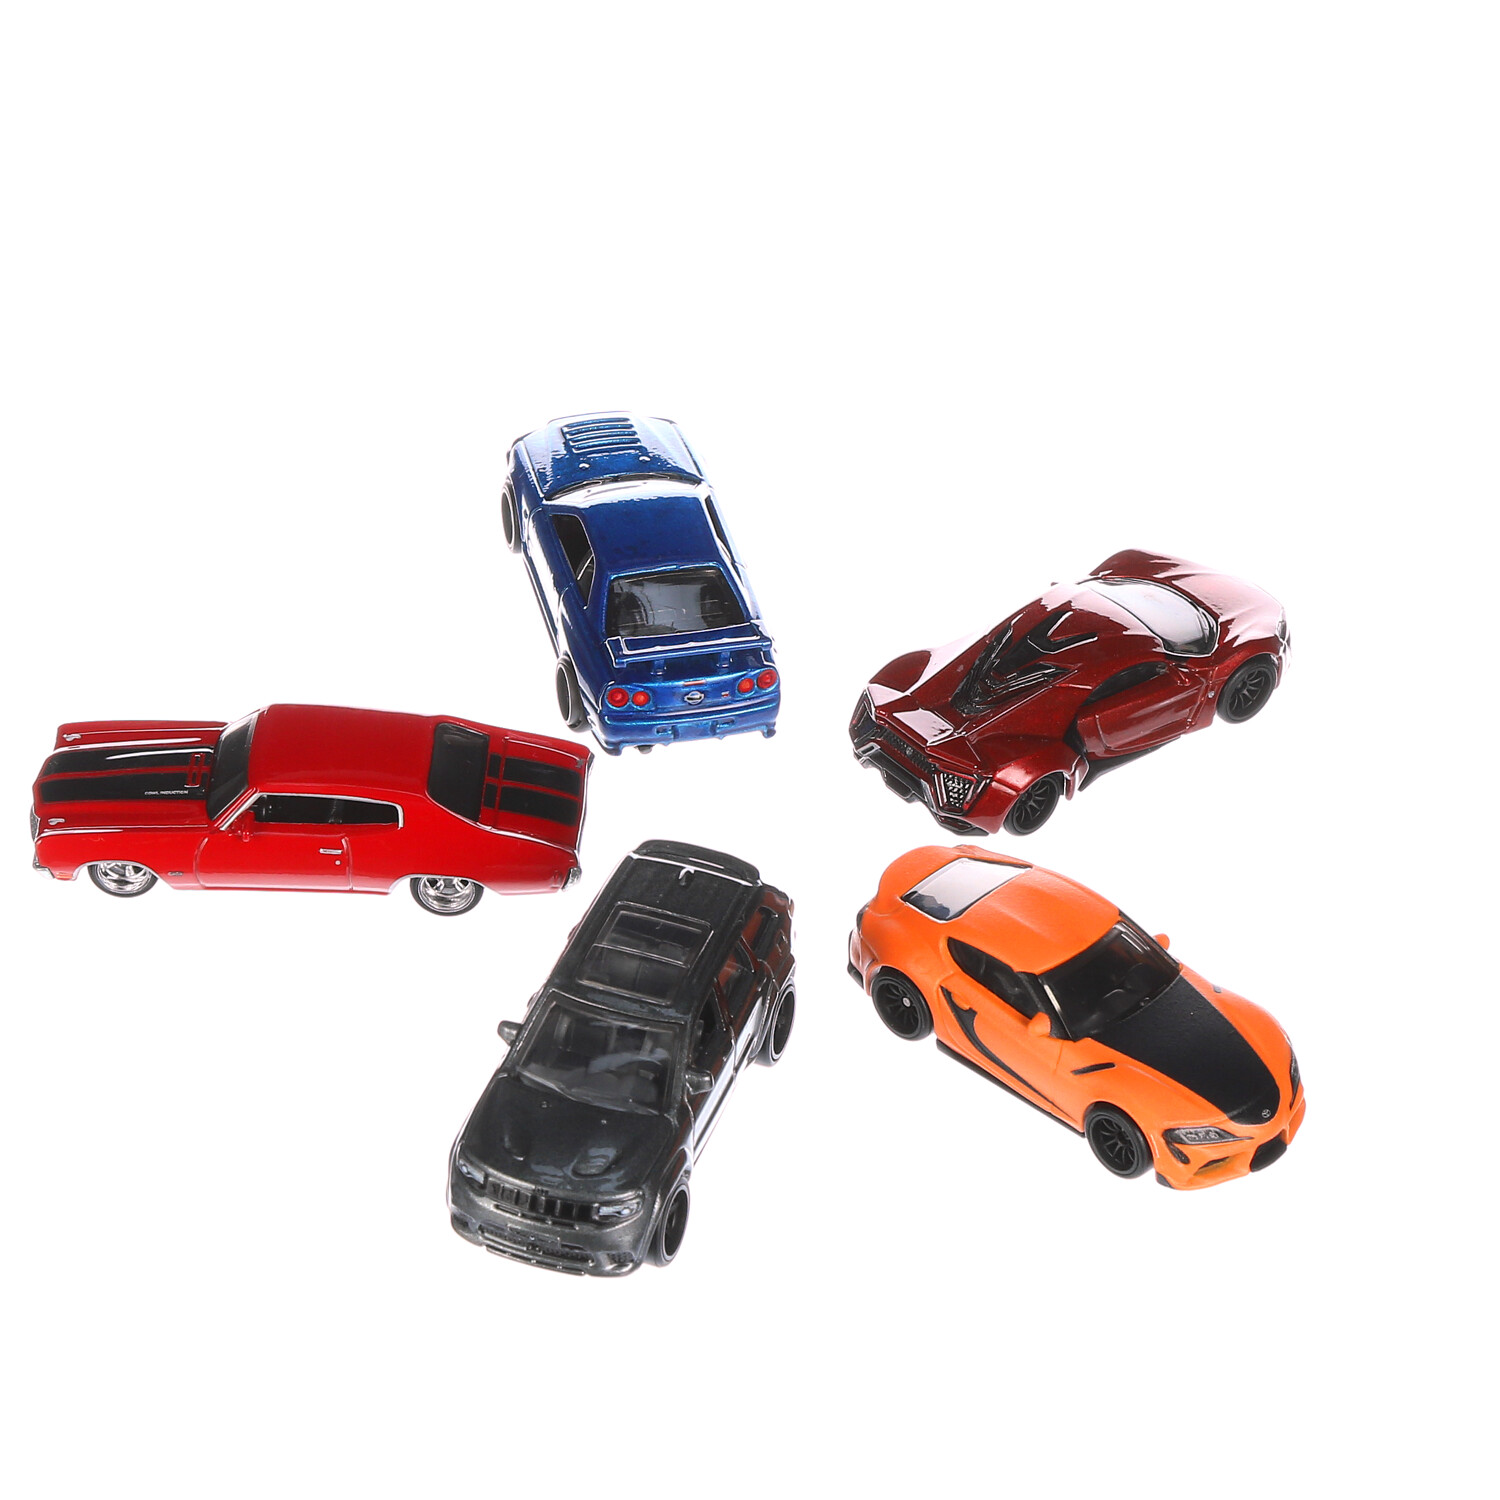 Hot Wheels Cars, 5 Fast & Furious 1:64 Scale Vehicles, Toy Race & Drift Car  Replicas from the Fast Movies, Exclusive Deco, for Kids & Collectors